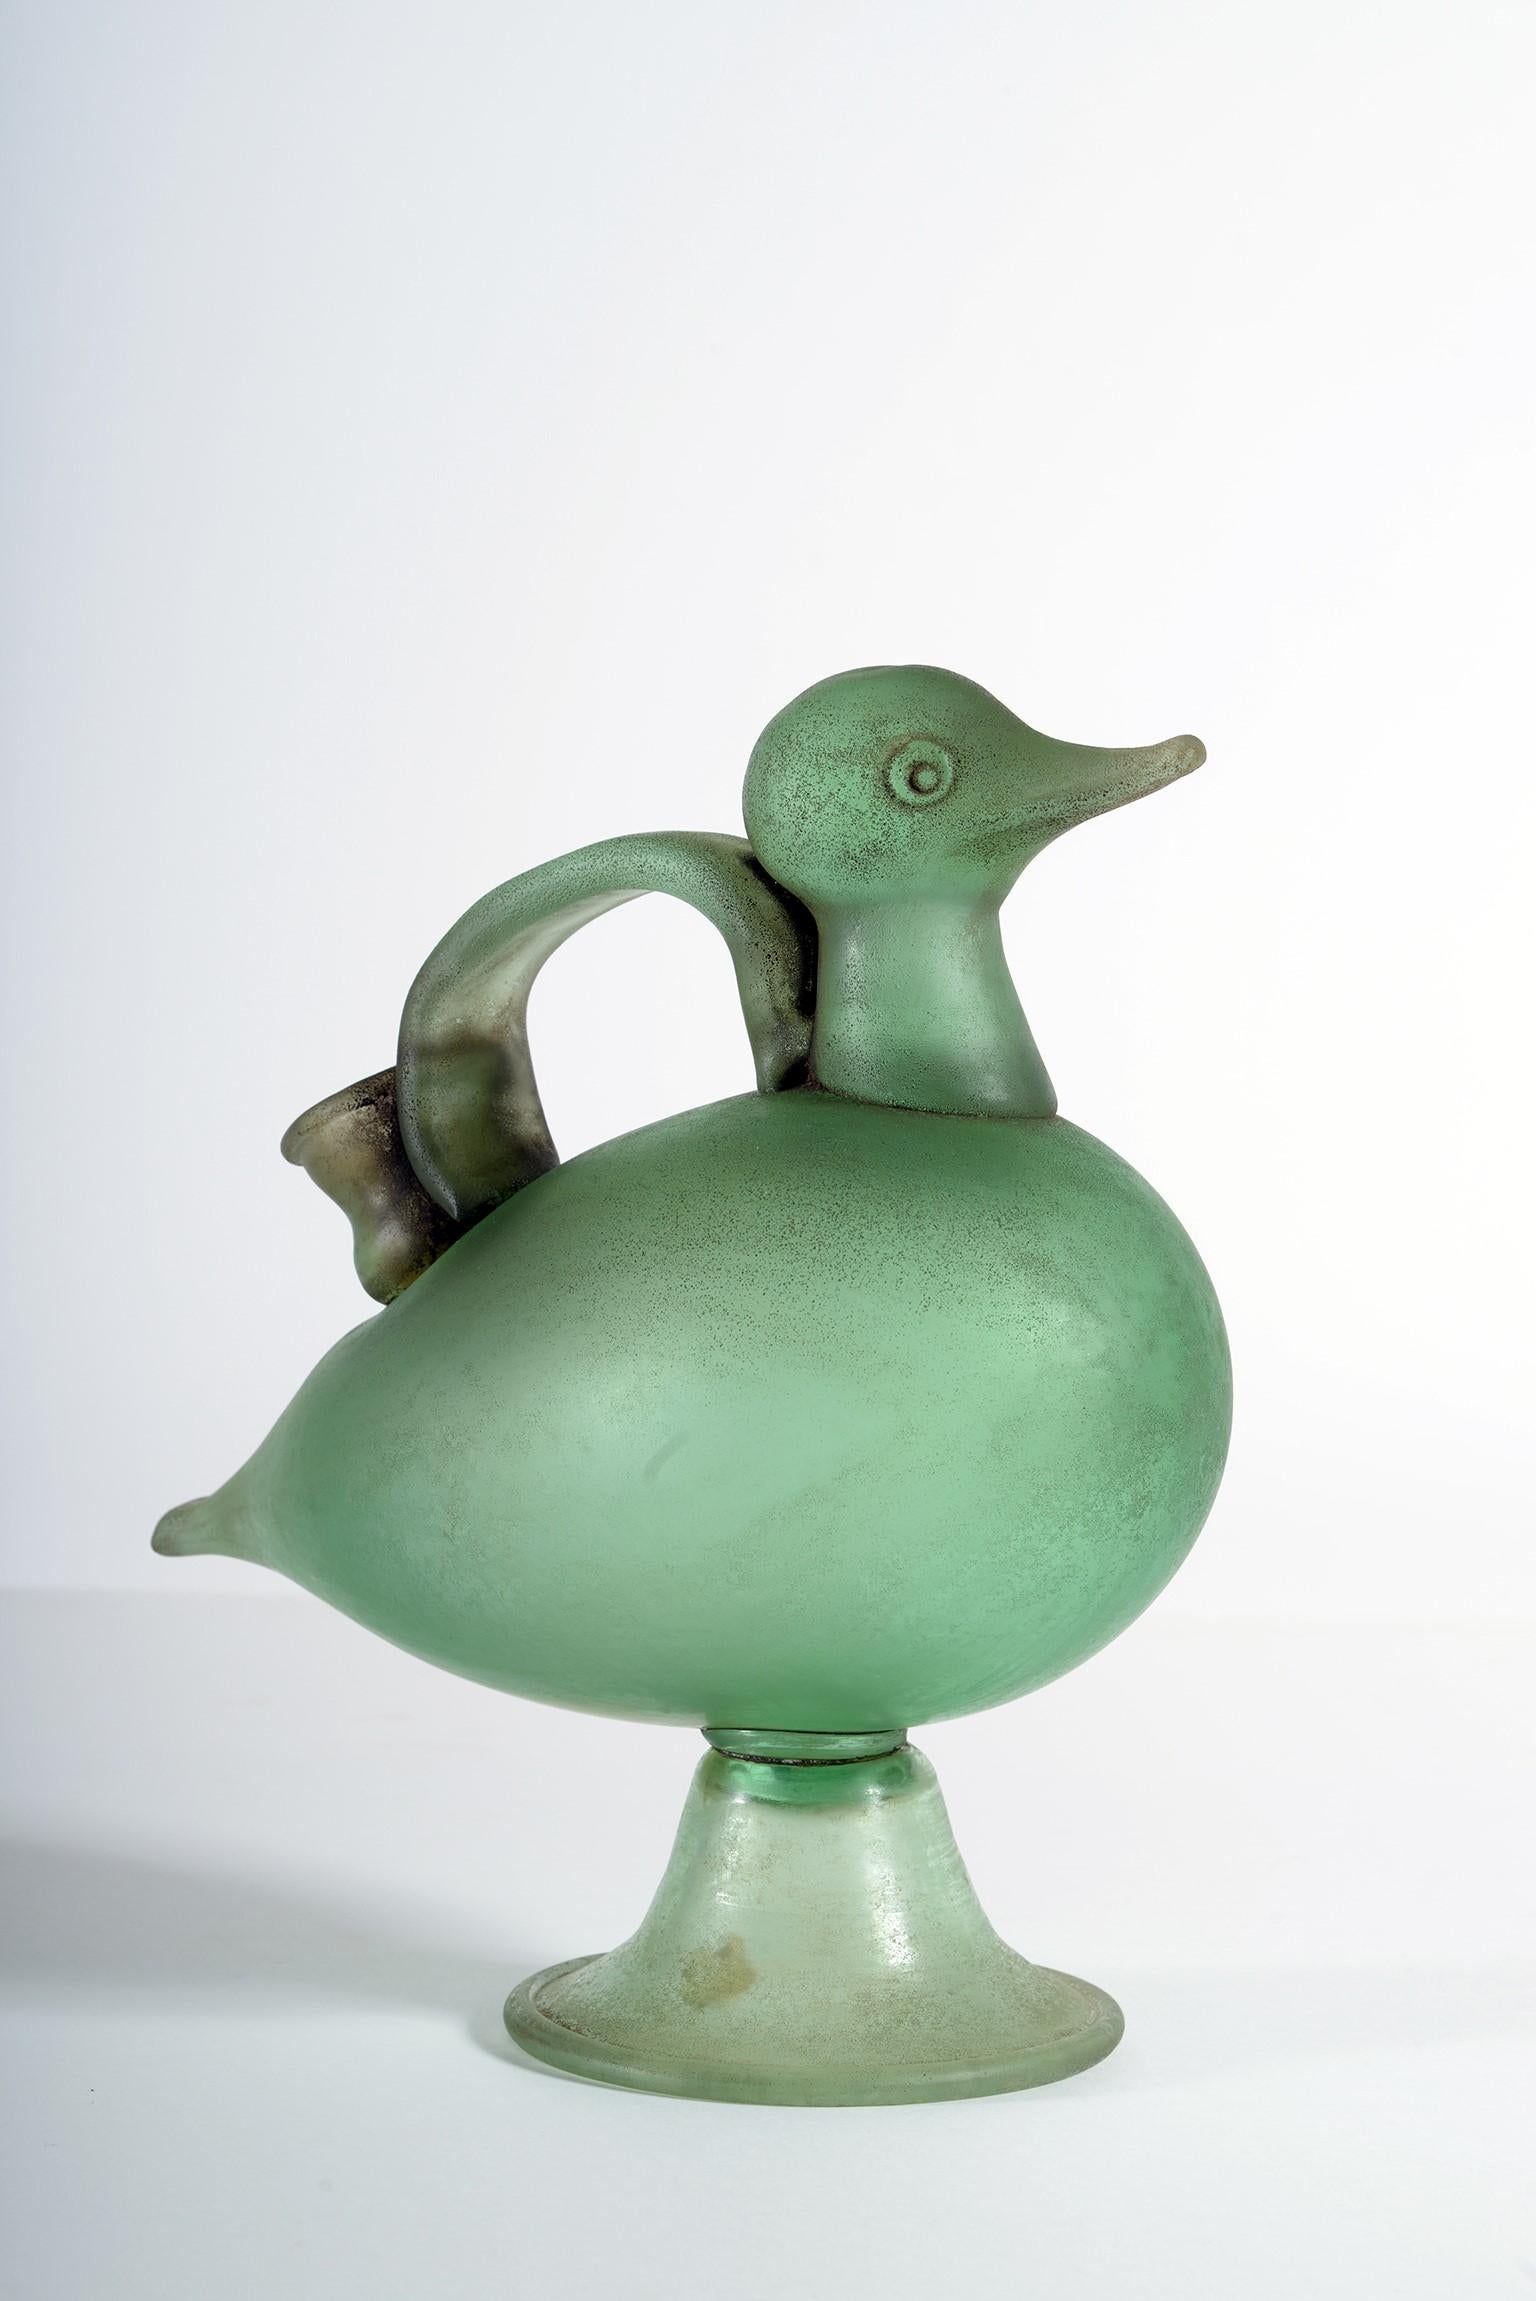 Seguso Vetri D'Arte Midcentury Duck-Shaped Acid-Etched Murano Blown Glass Vase In Good Condition For Sale In Firenze, Toscana